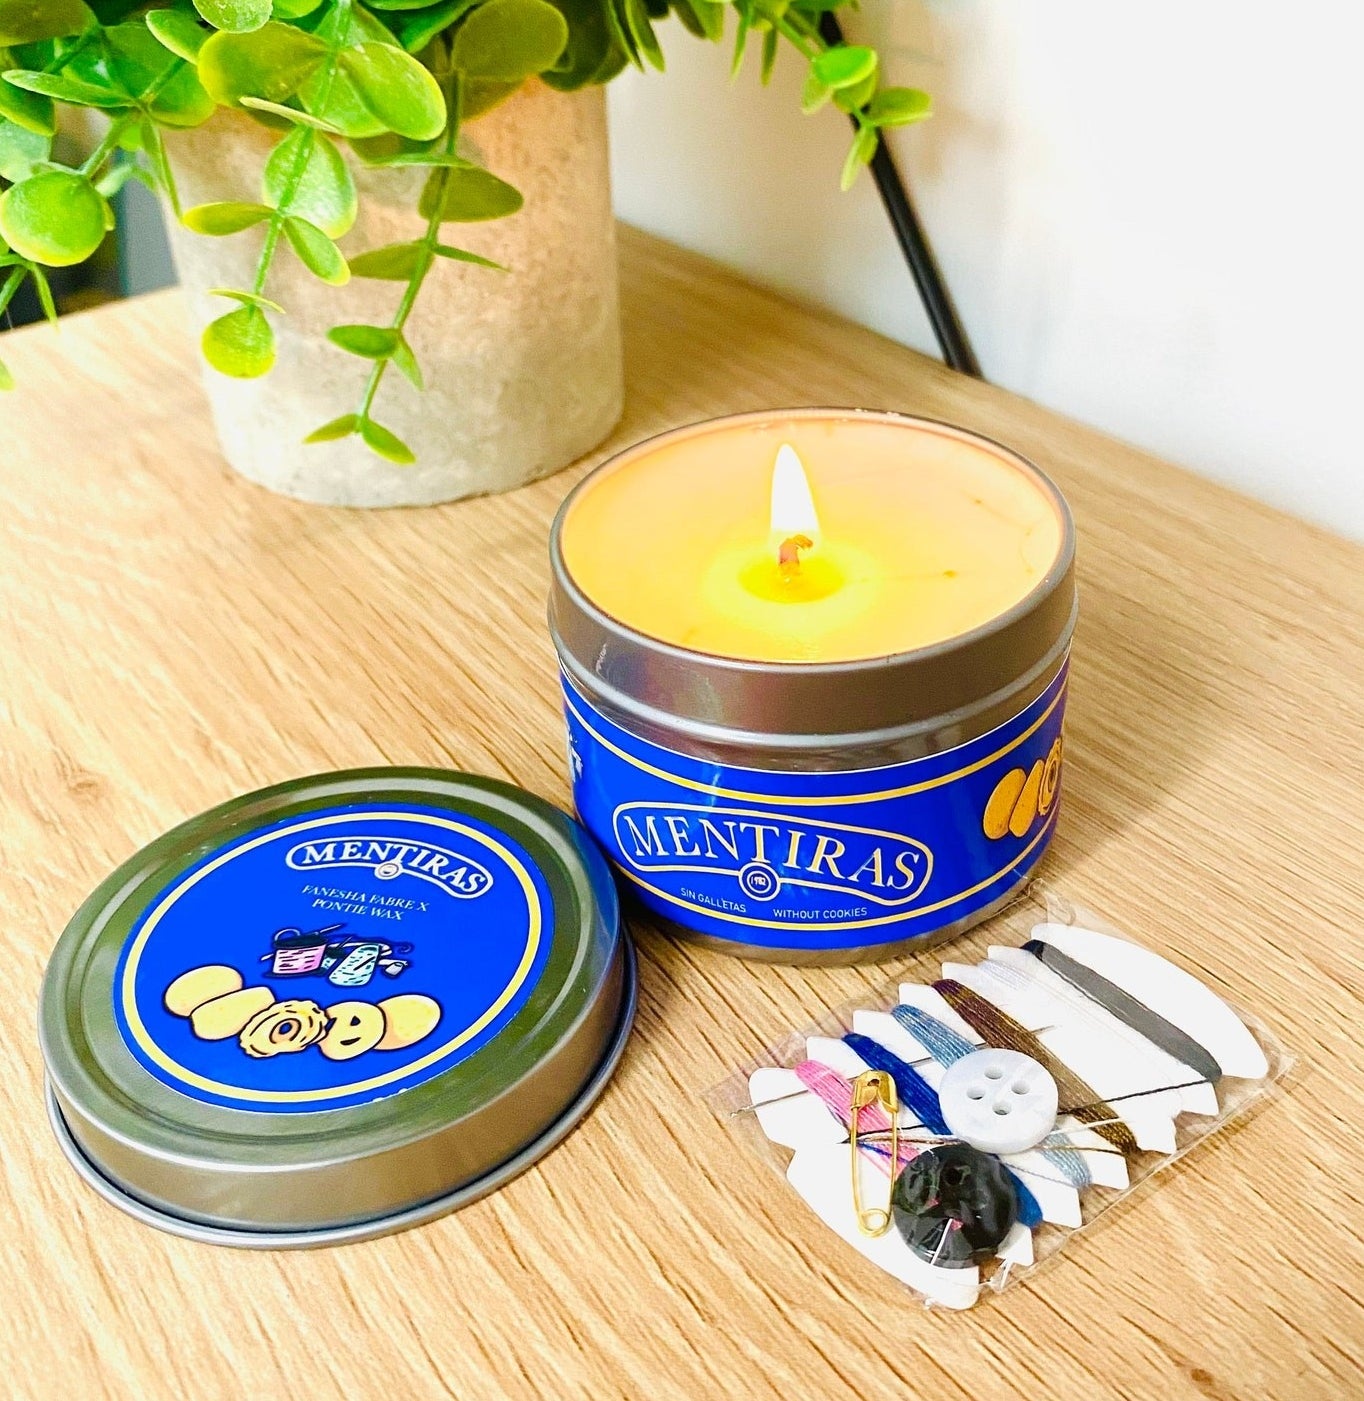 The sugar cookie candle and the included mini sewing kit